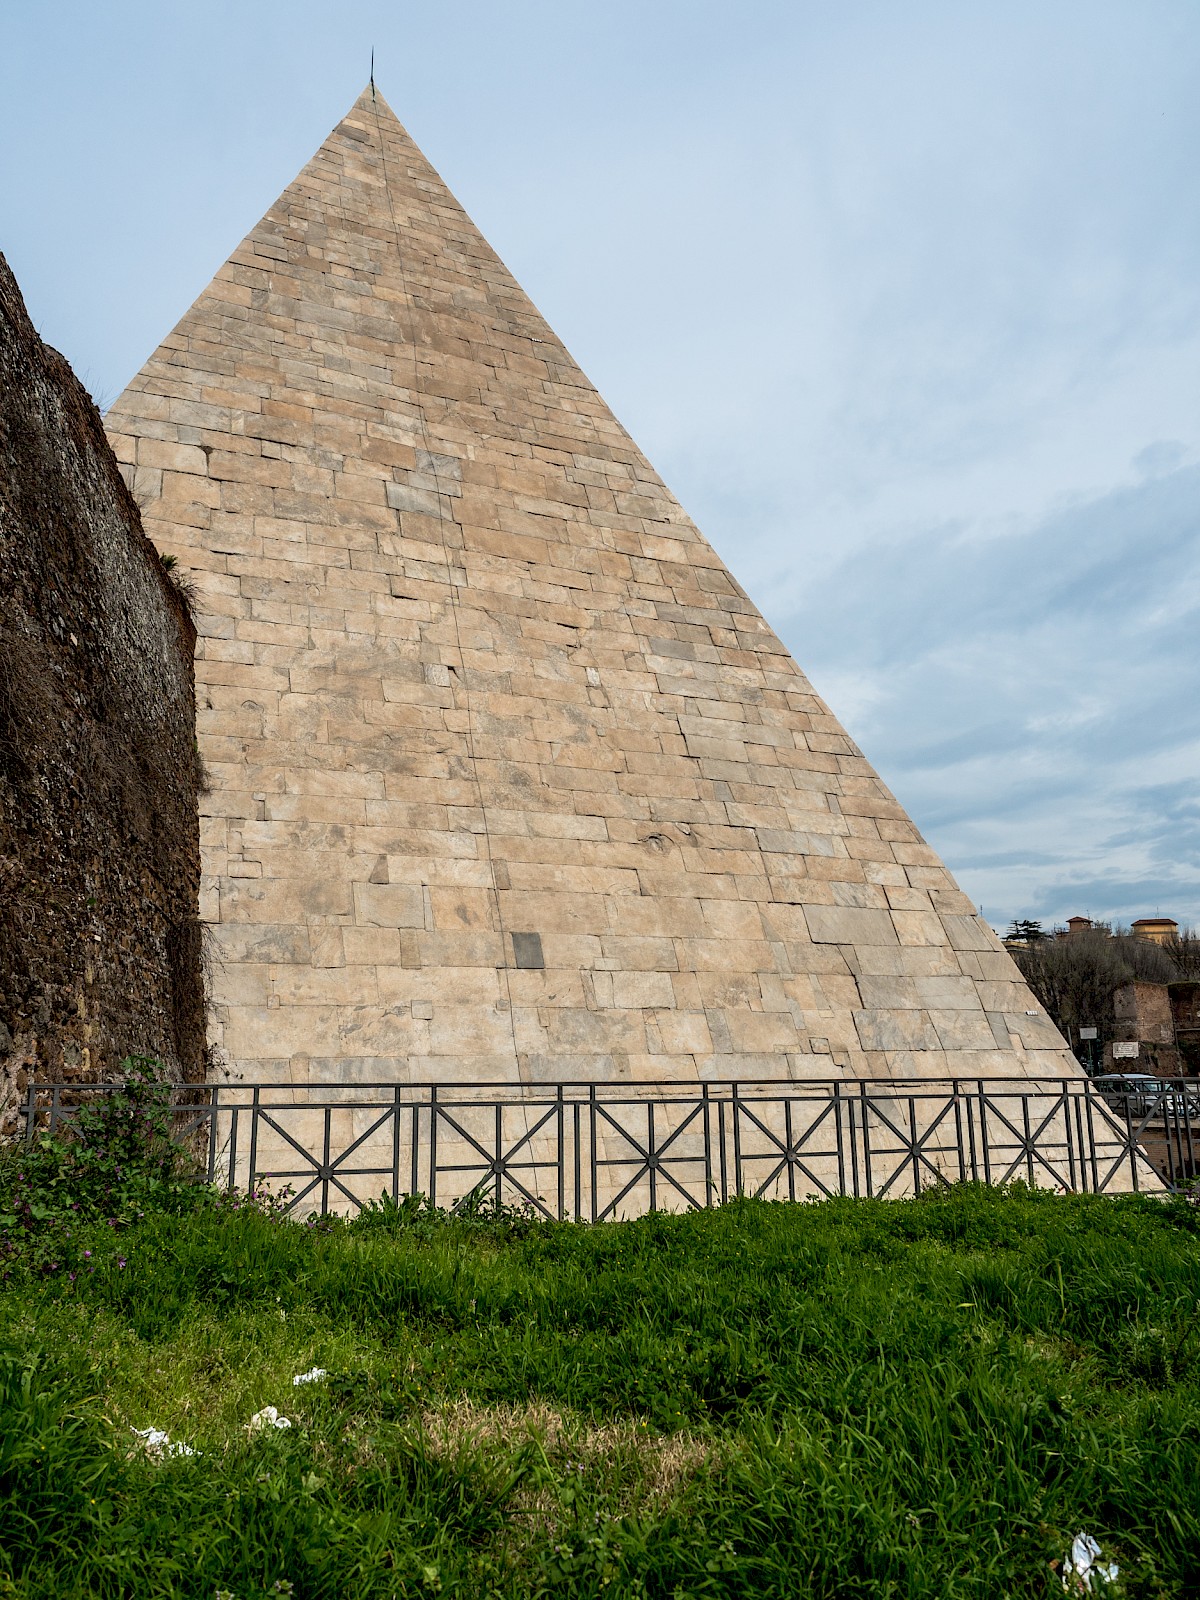 Pyramid of Cestius, additional view